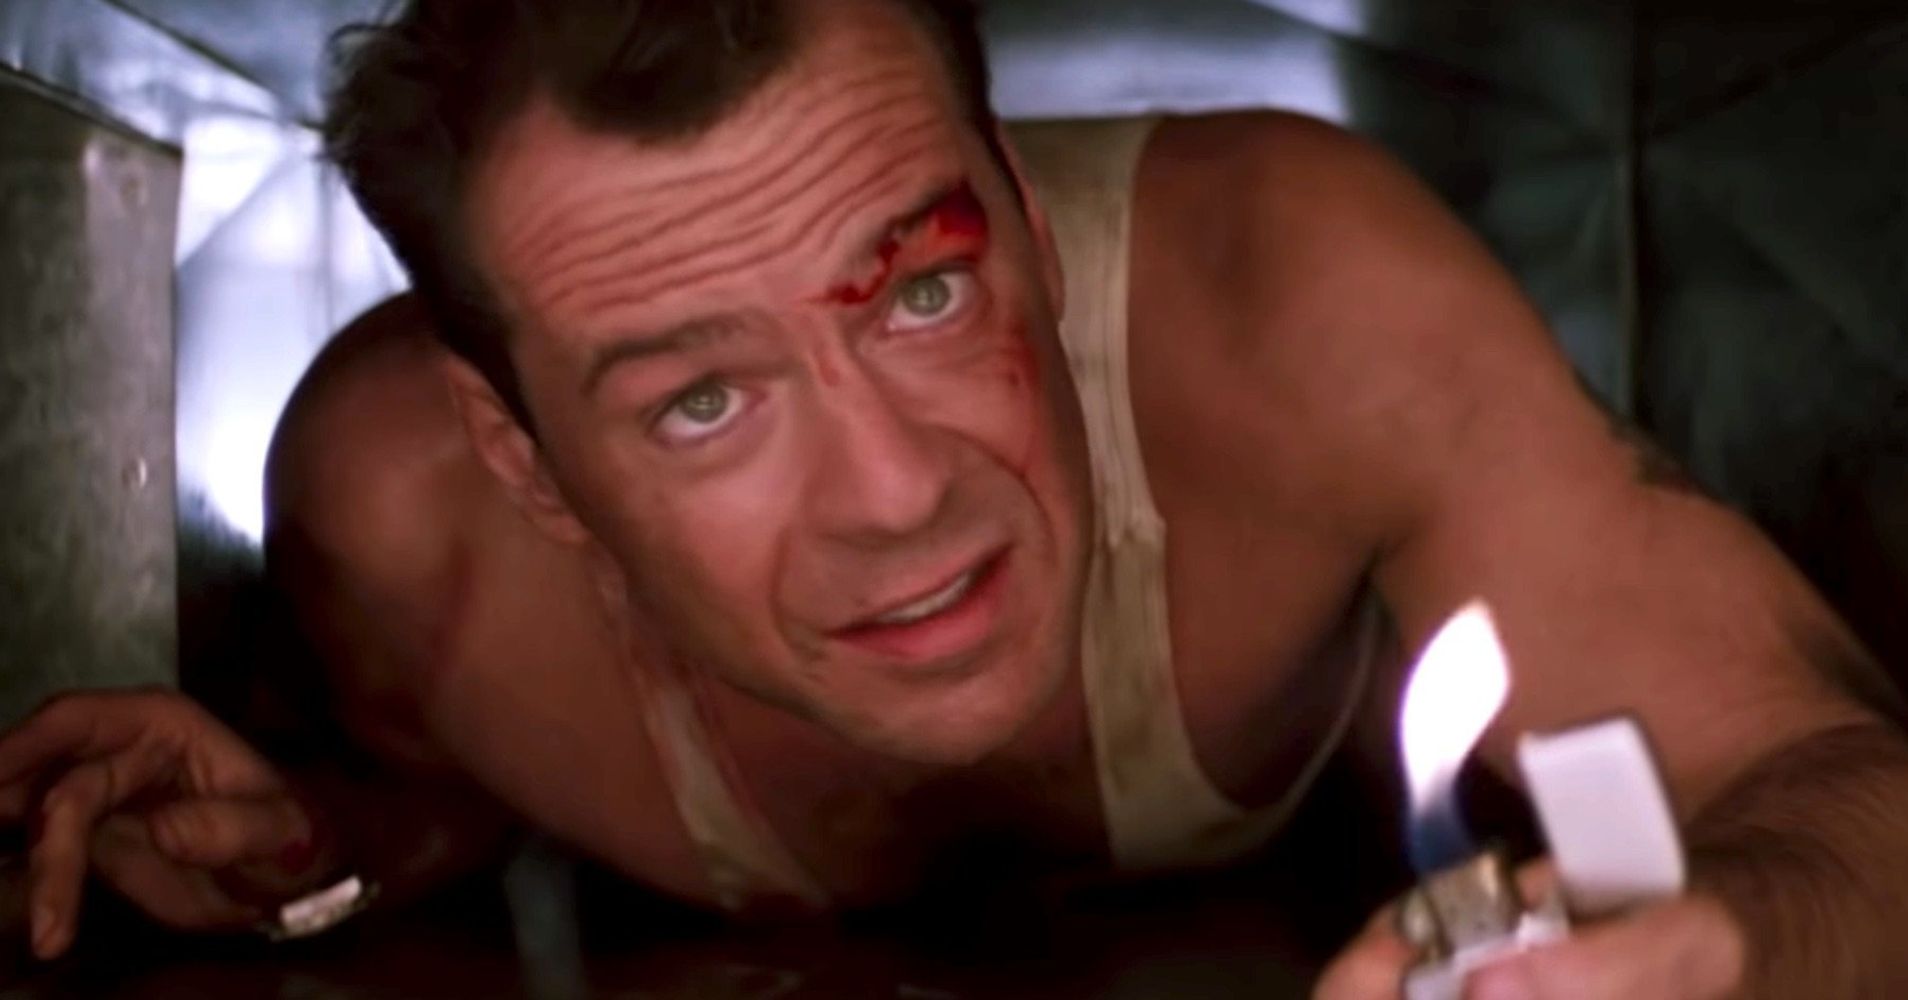 The Debate Is Over: New Trailer Makes ‘Die Hard’ An Official Christmas Movie | HuffPost